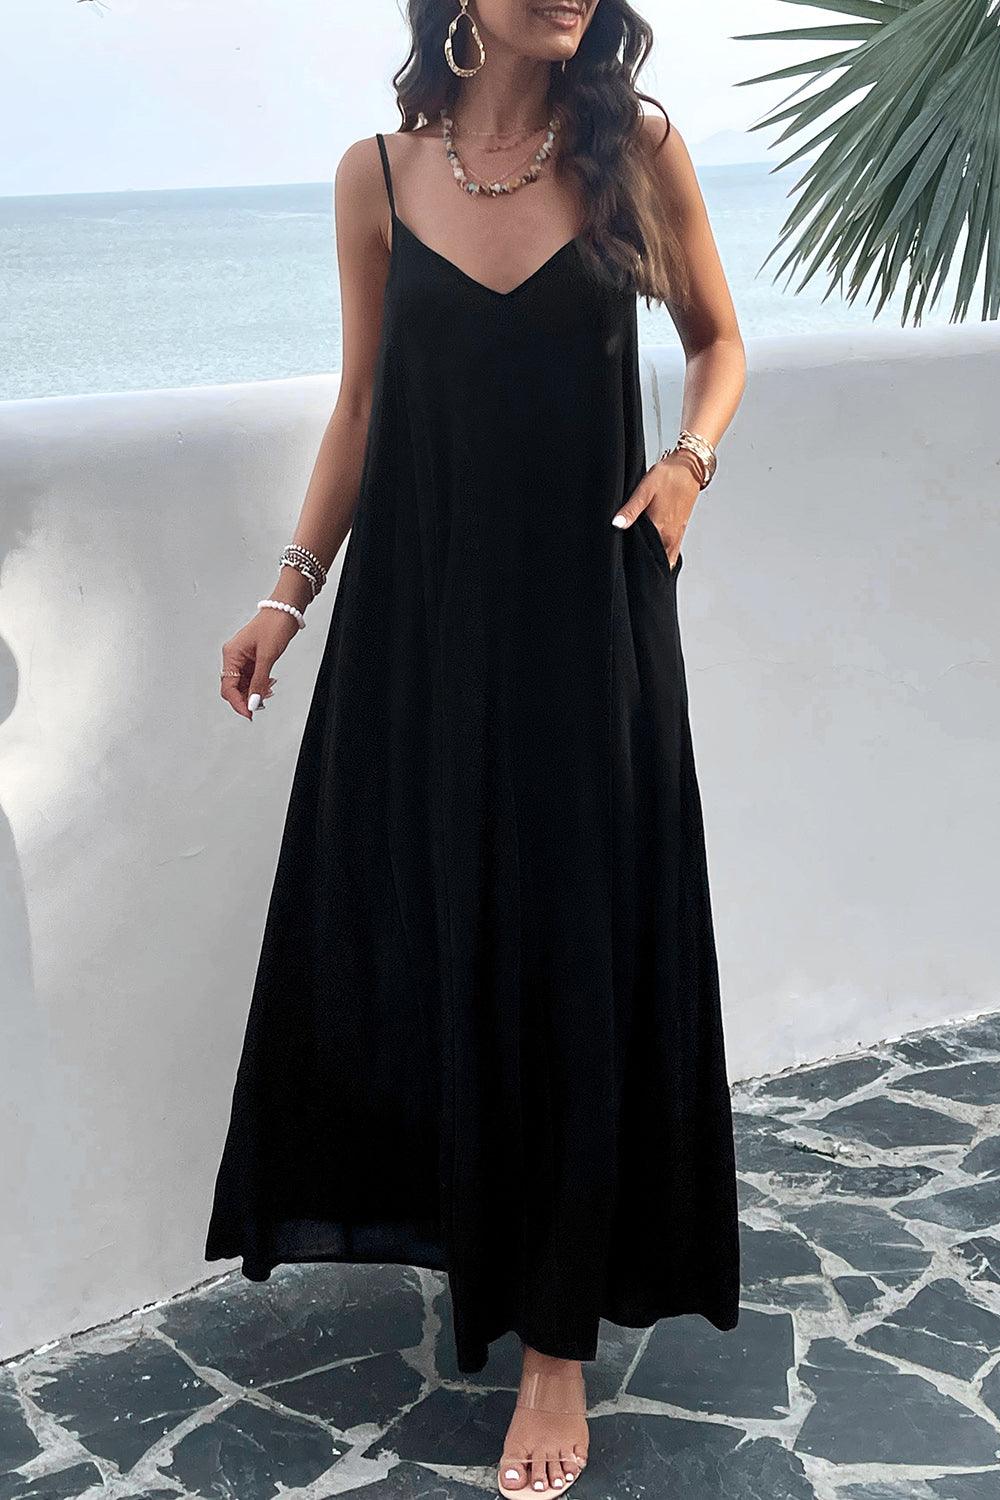 a woman in a black dress standing by the ocean